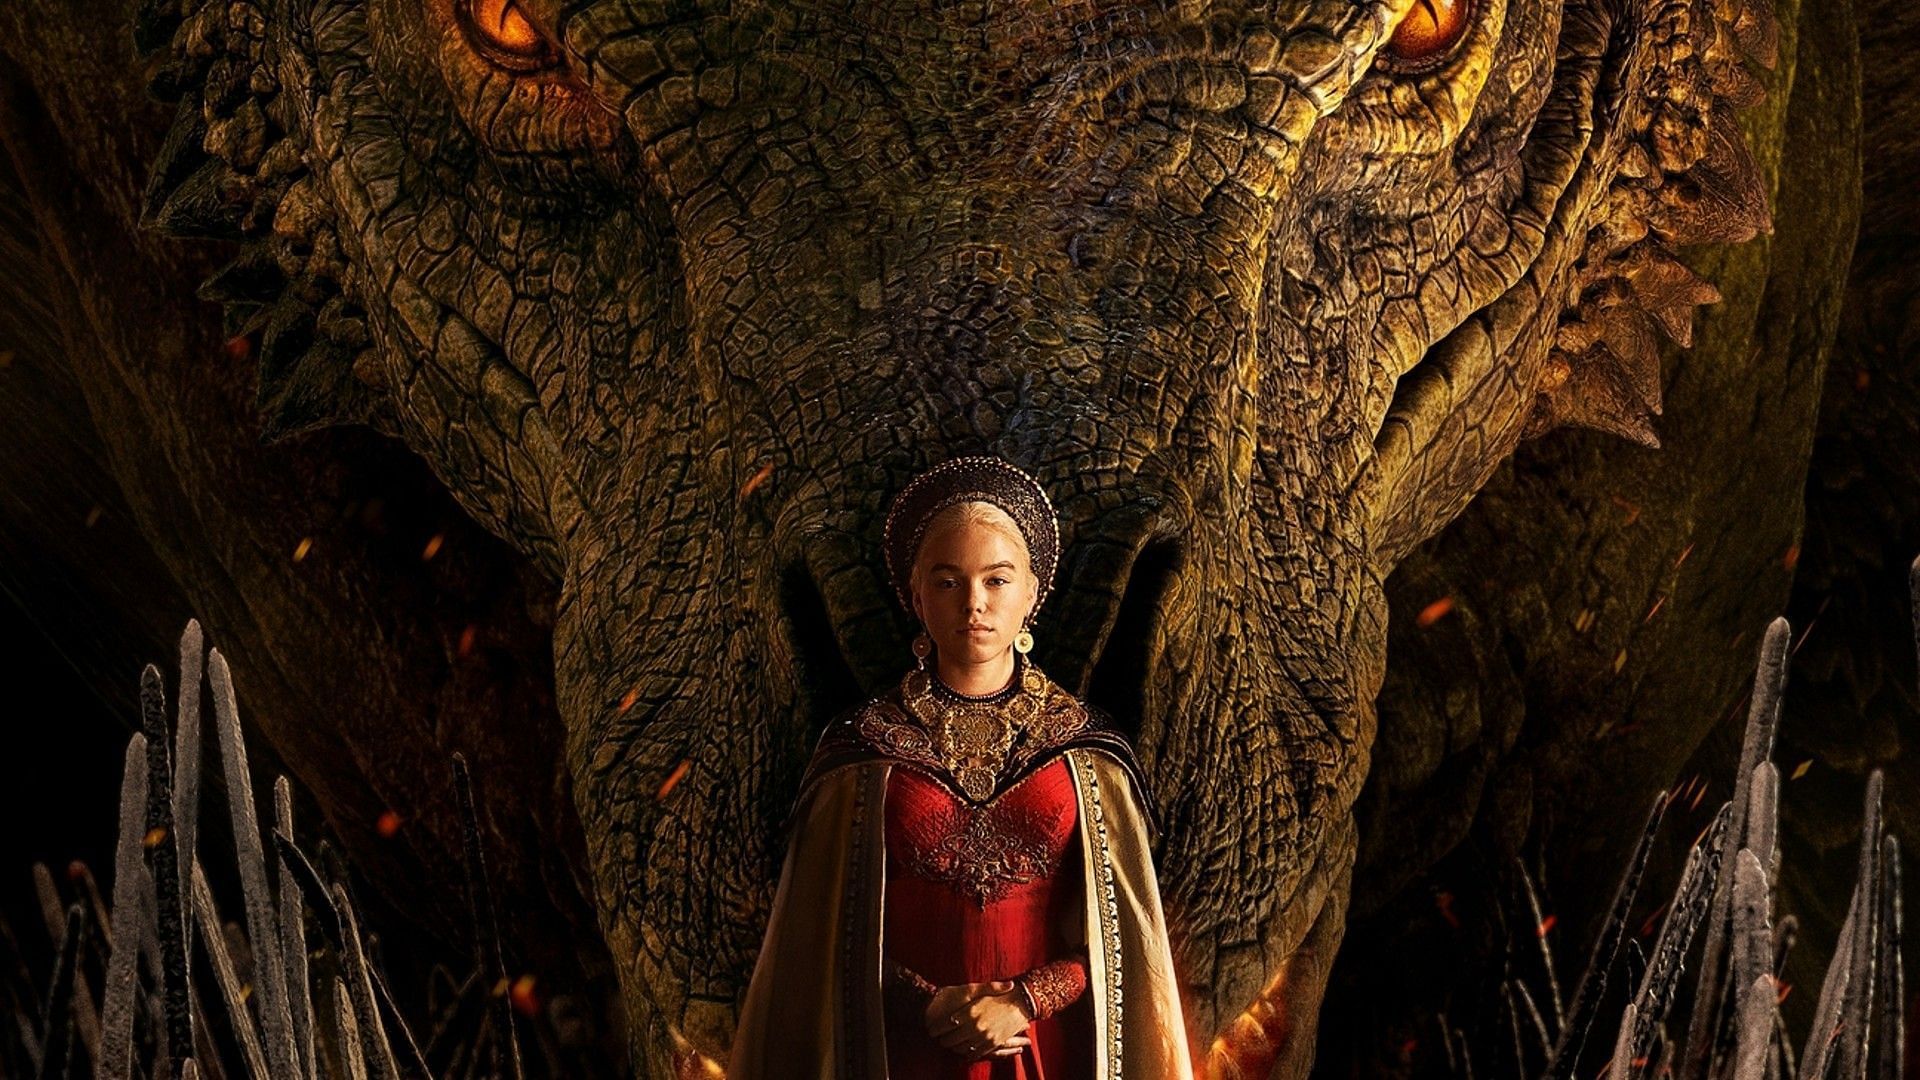 Who is Milly Alcock? Meet the actor who plays young Rhaenyra Targaryen in House of the Dragon